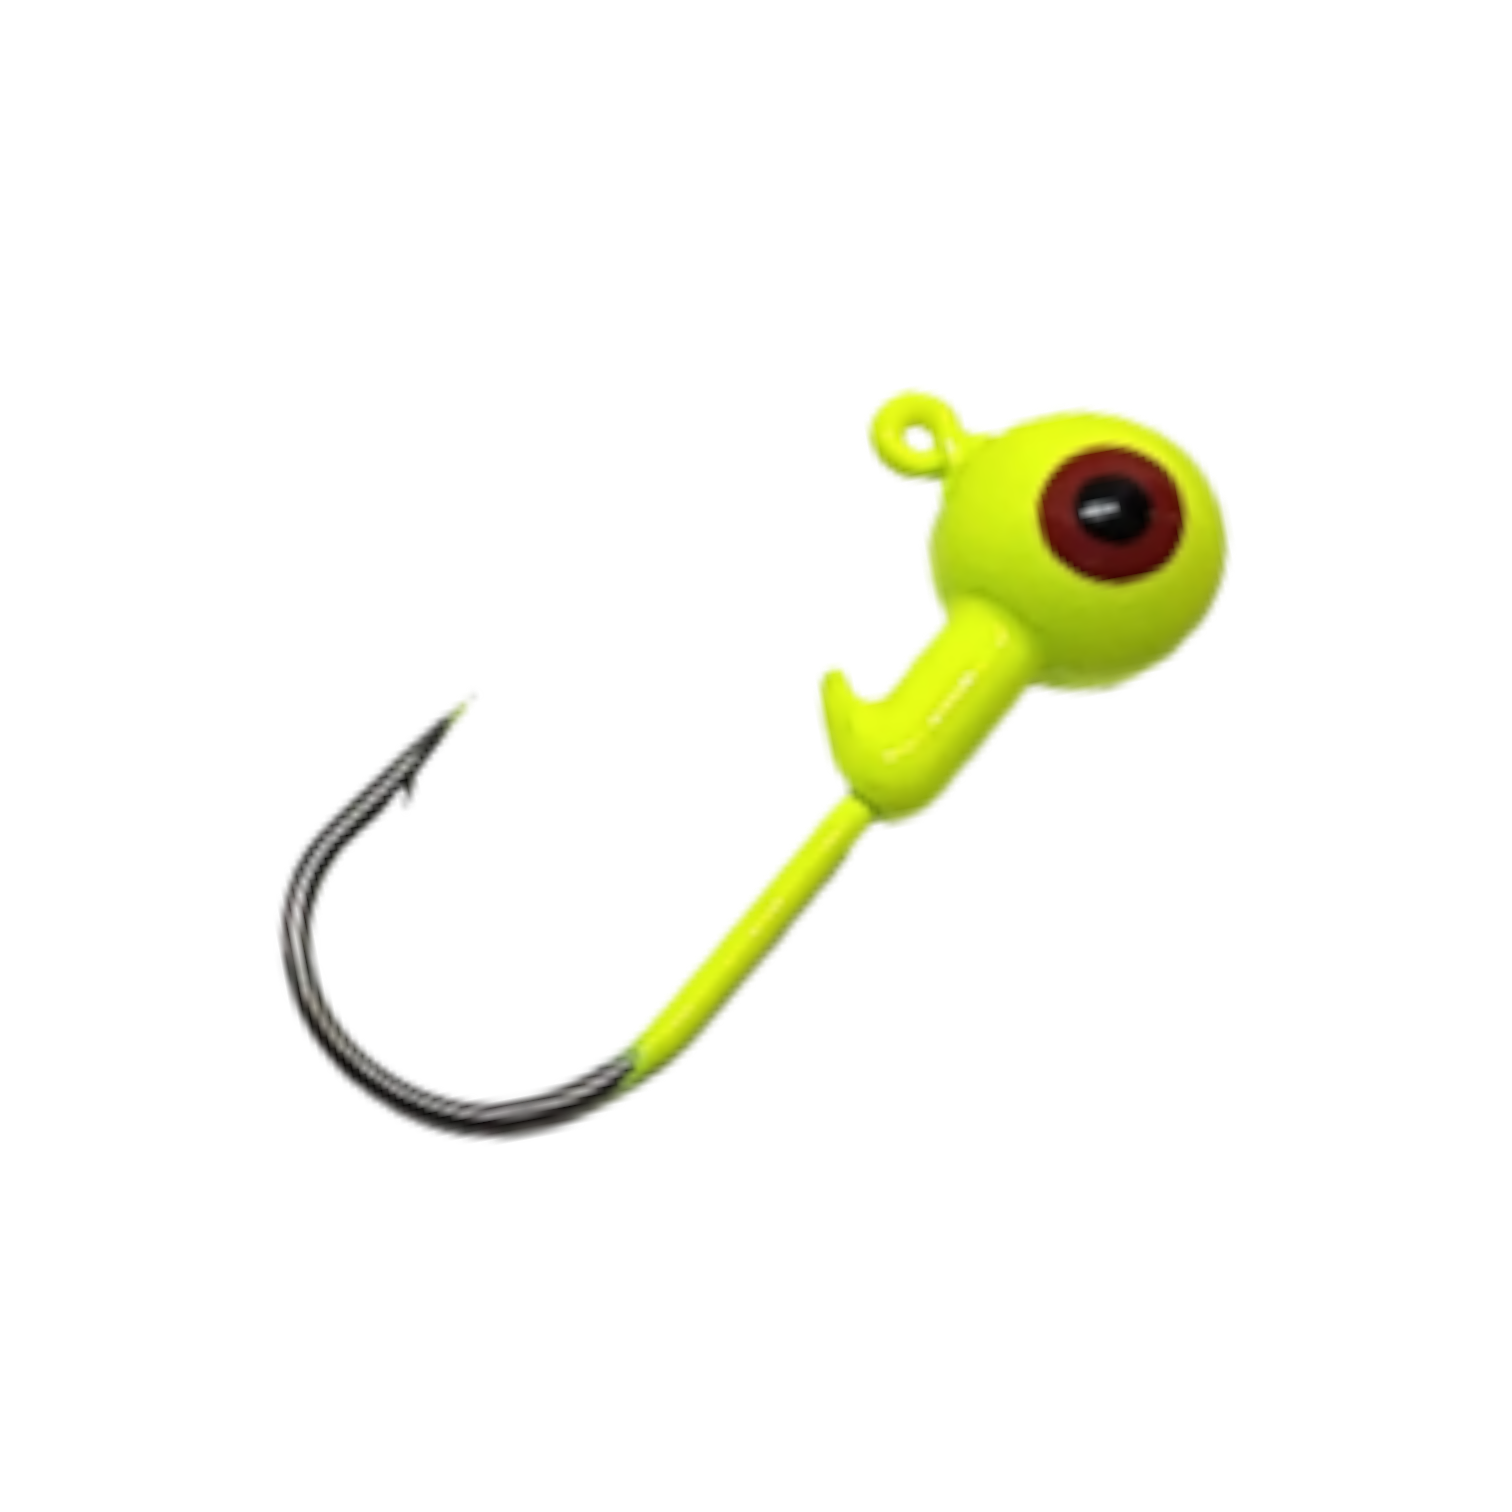 https://castcray.com/wp-content/uploads/2022/07/1-4-OZ-ROUND-JIG-HEADS-CHARTREUSE-300x300-PhotoRoom-1.png